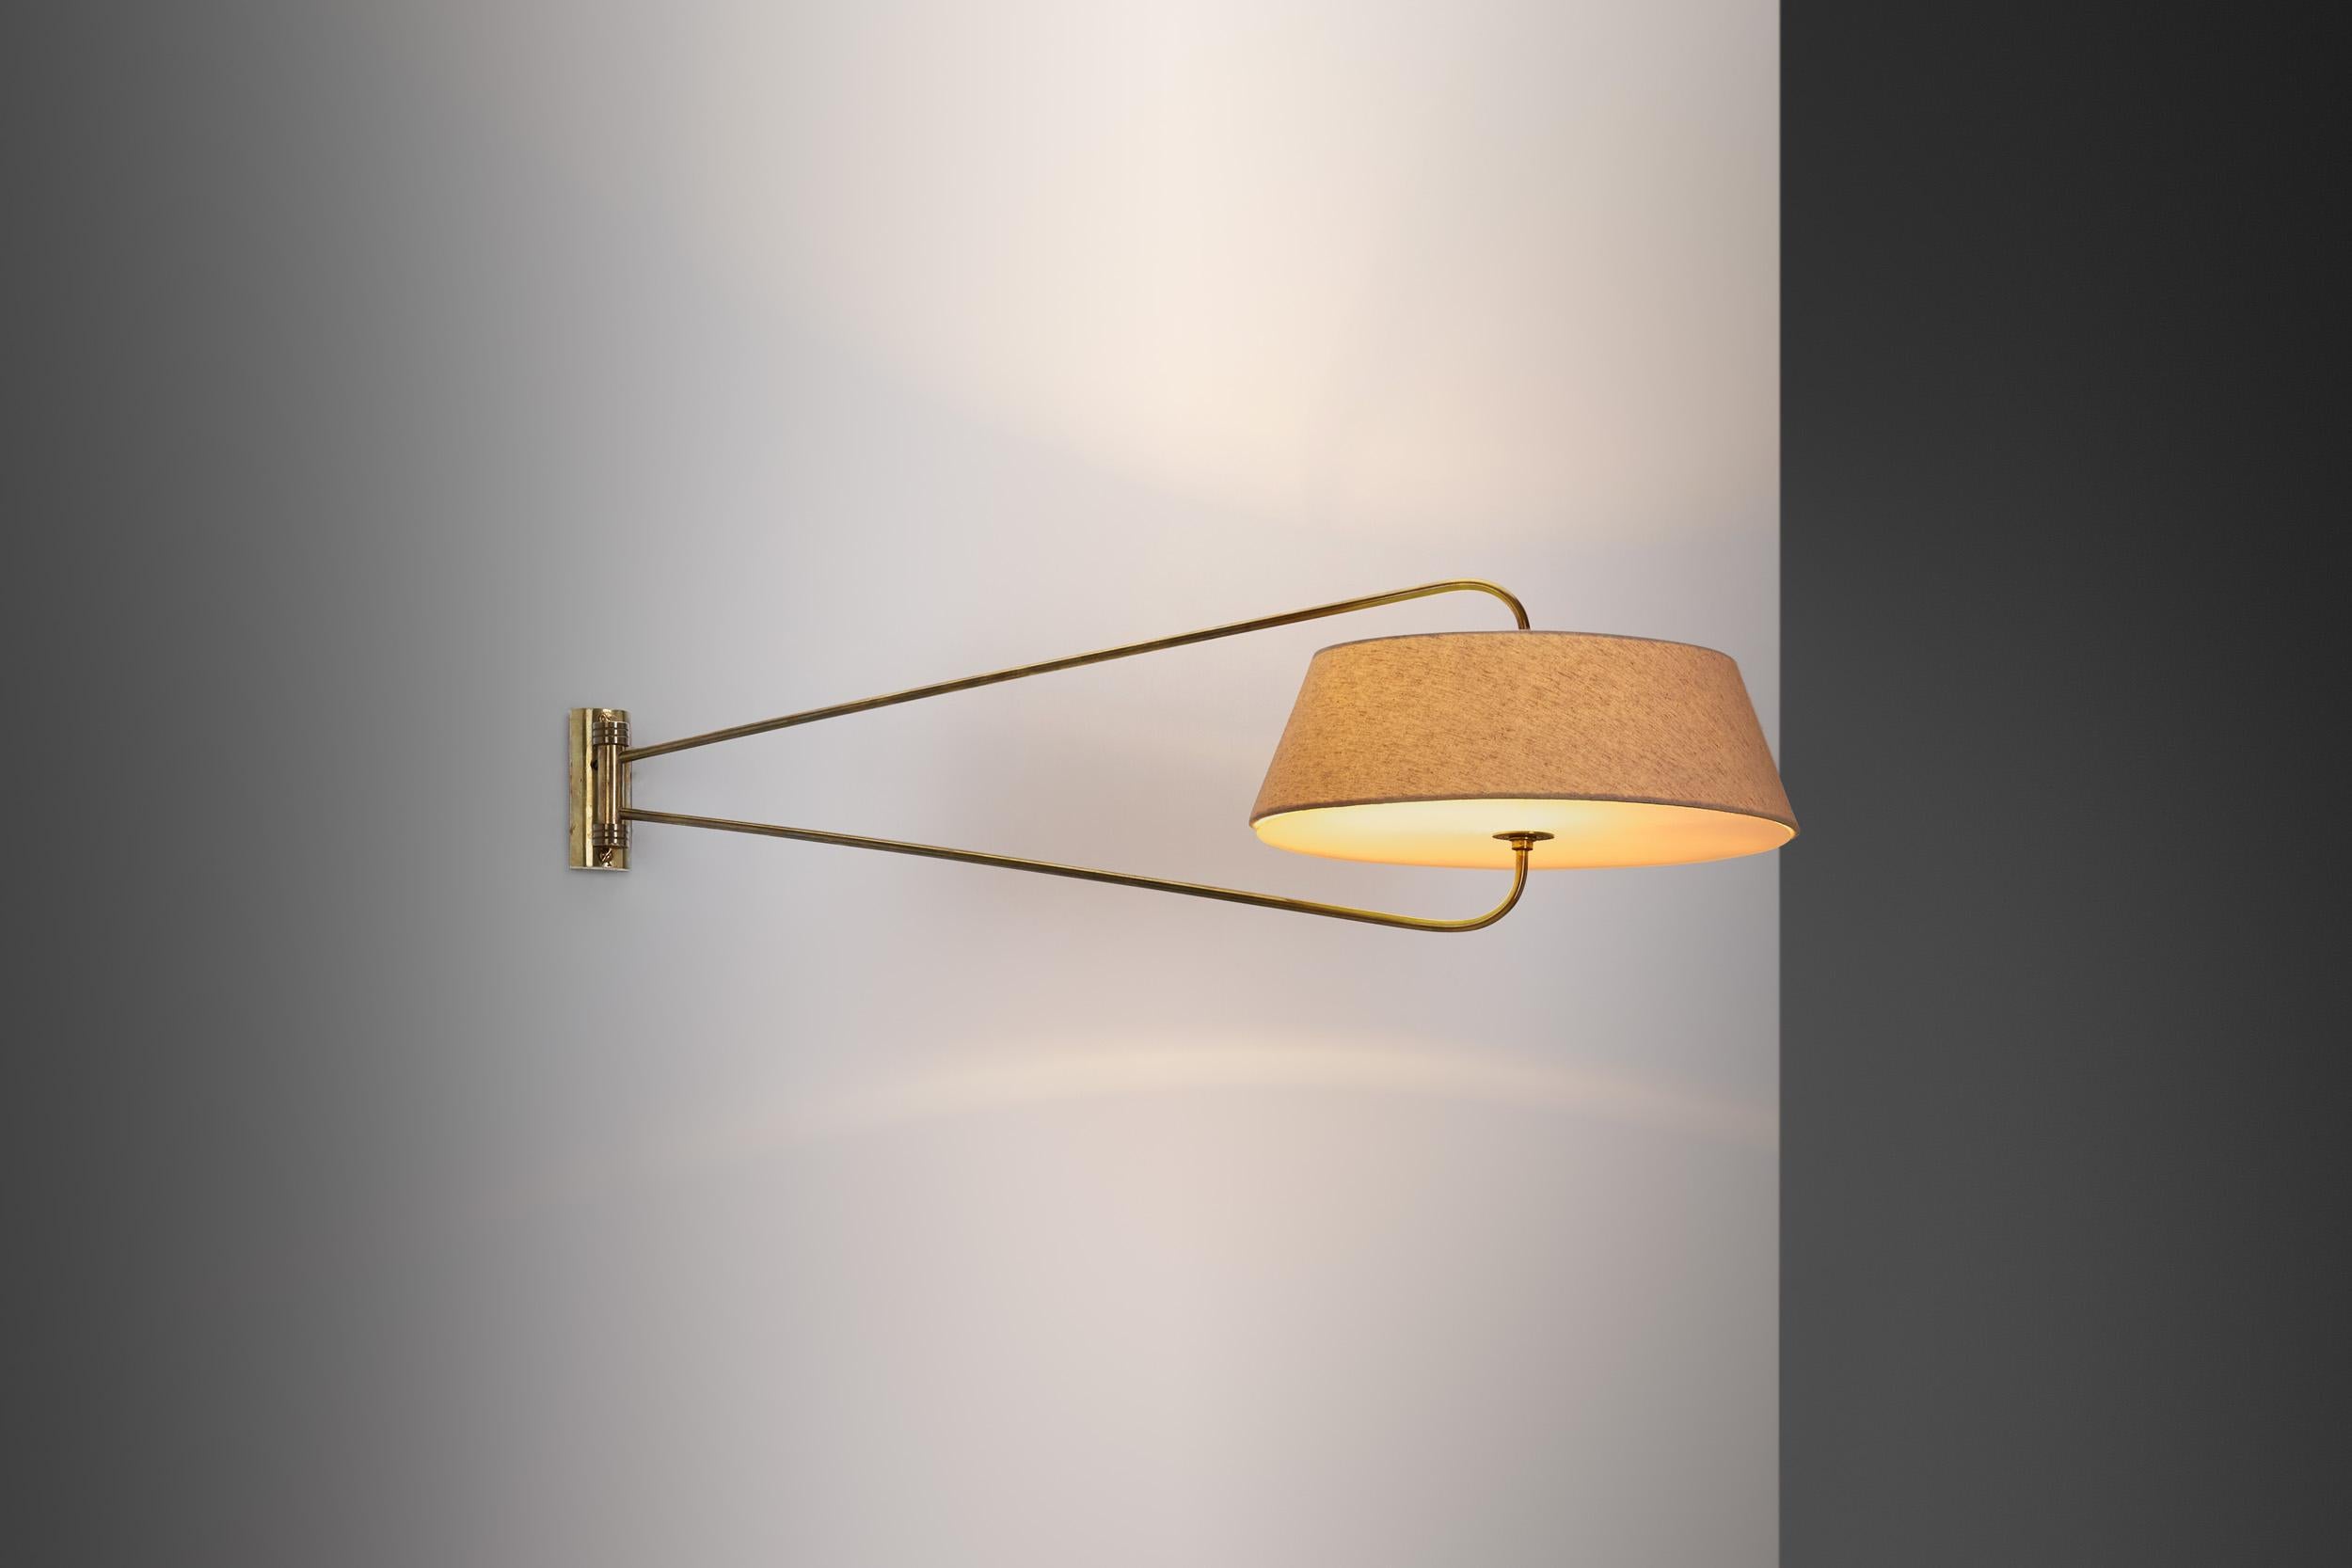 The best qualities of European mid-century designers’ light fixtures are most often their atmospheric light and disciplined, functionalist execution, perfected by the inclusion of unique design elements. Exemplified by this wall lamp, these